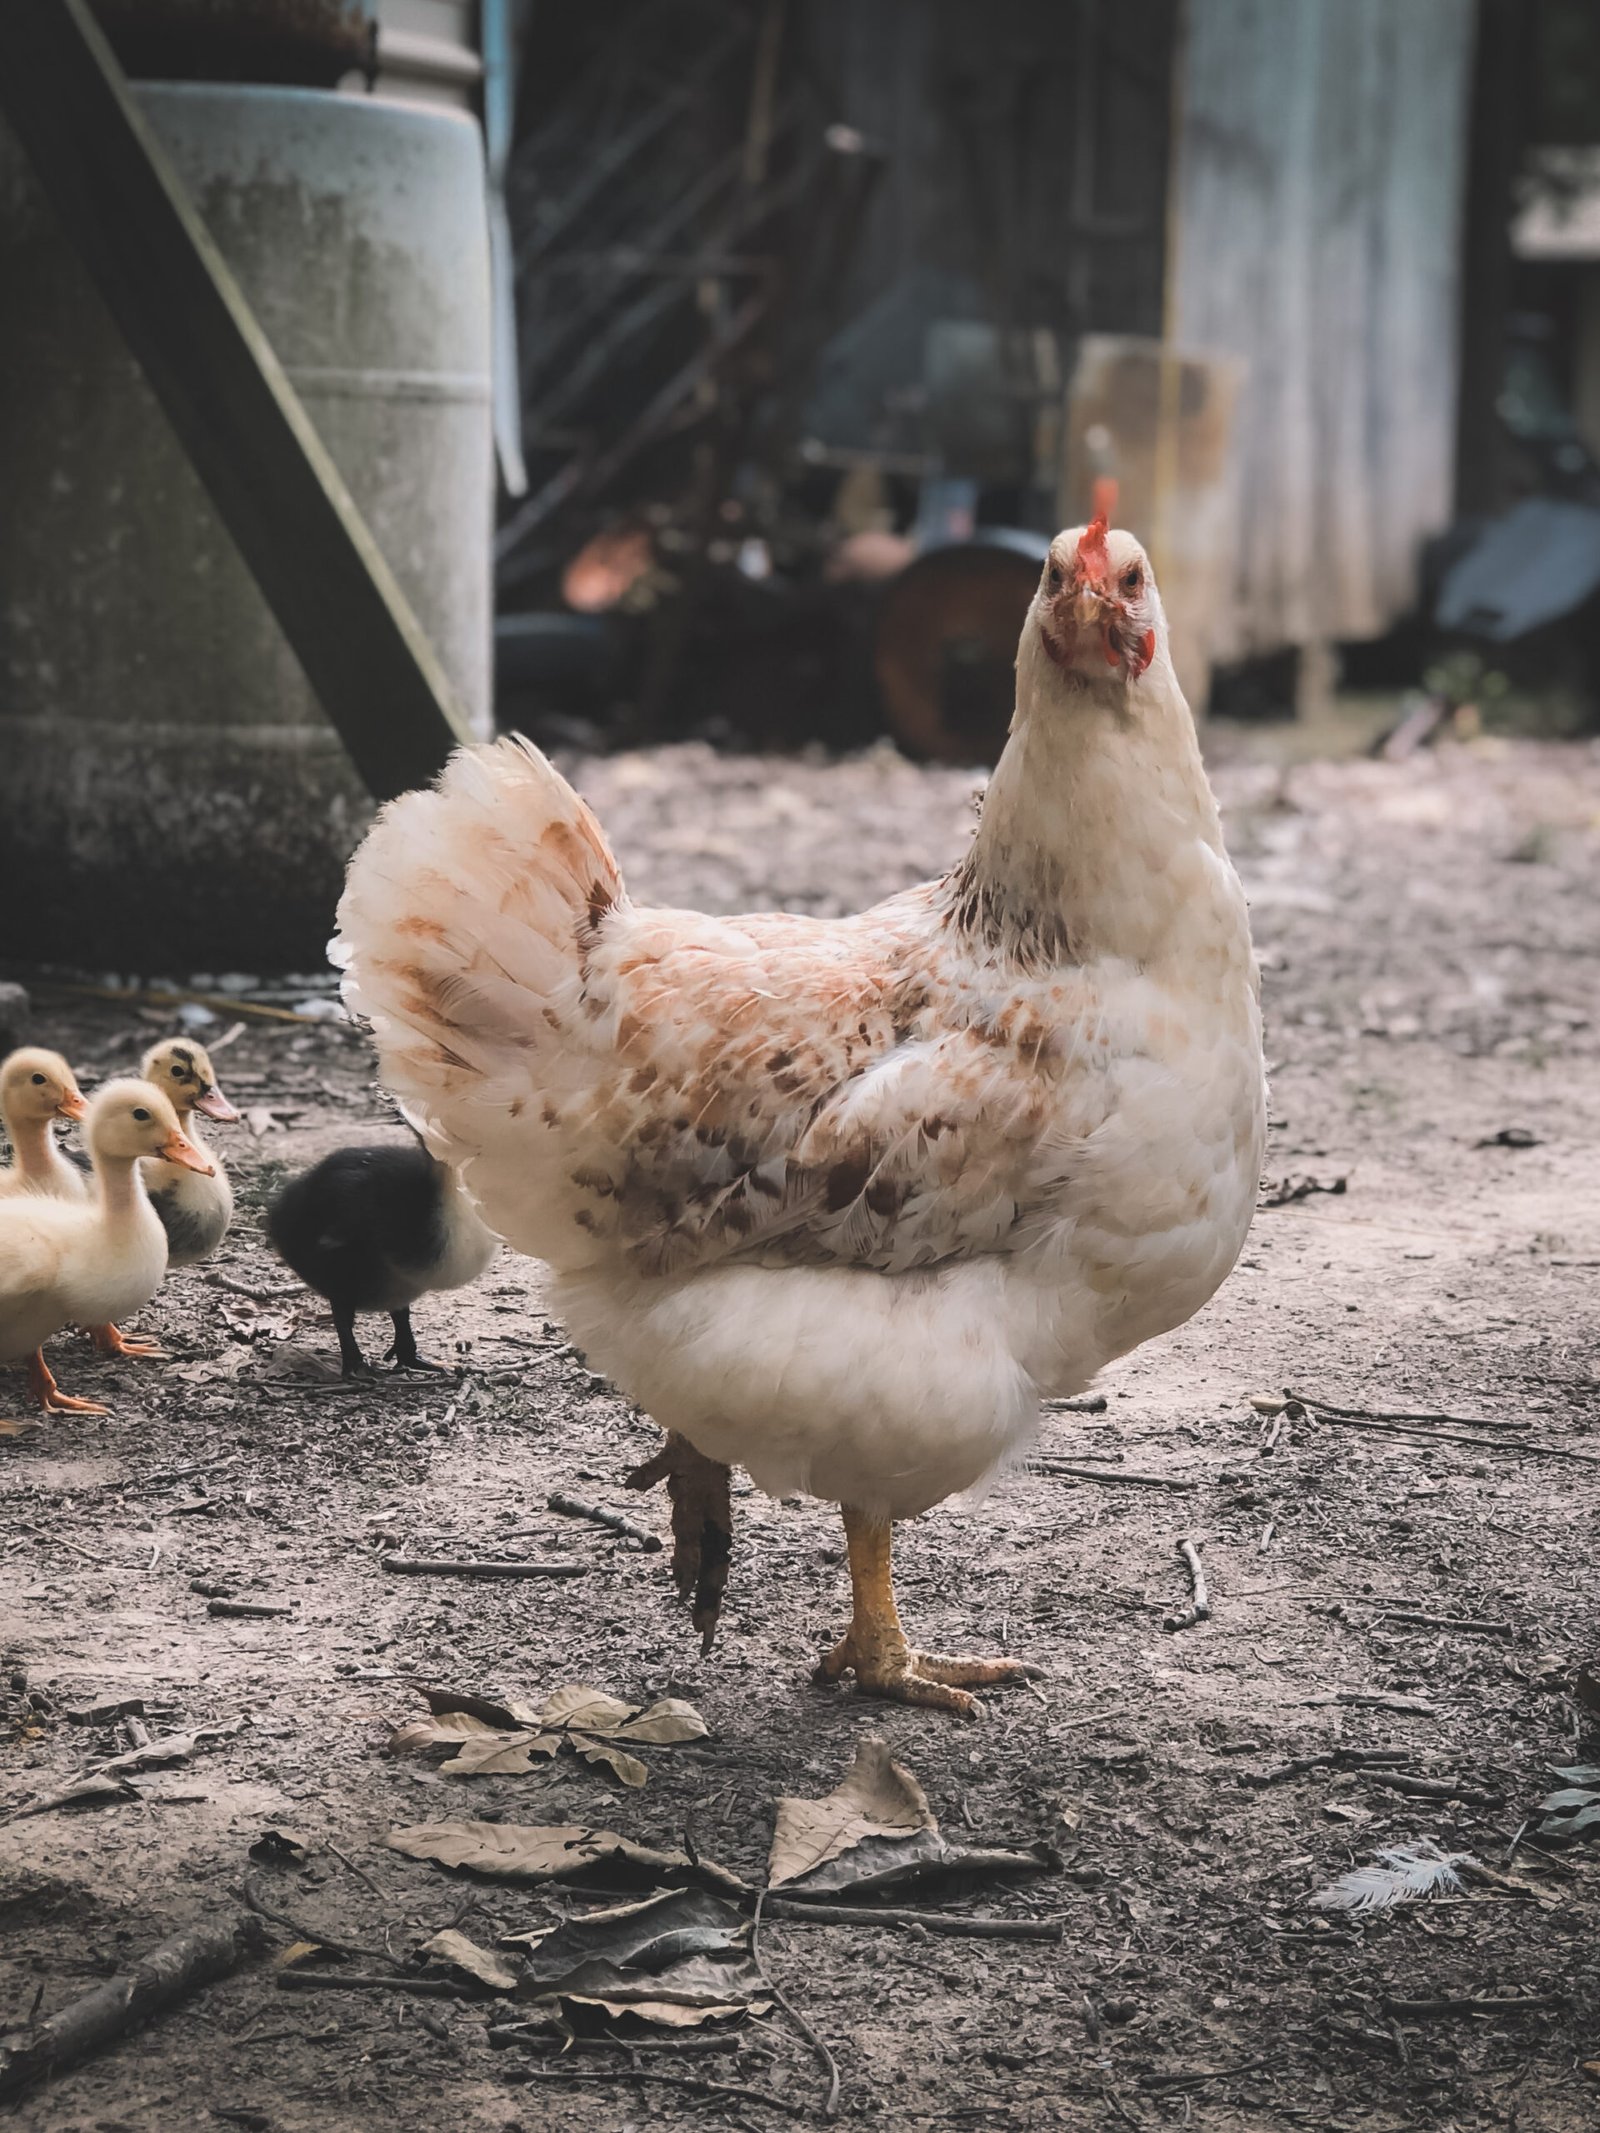 How Do You Prevent And Treat Common Chicken Diseases?